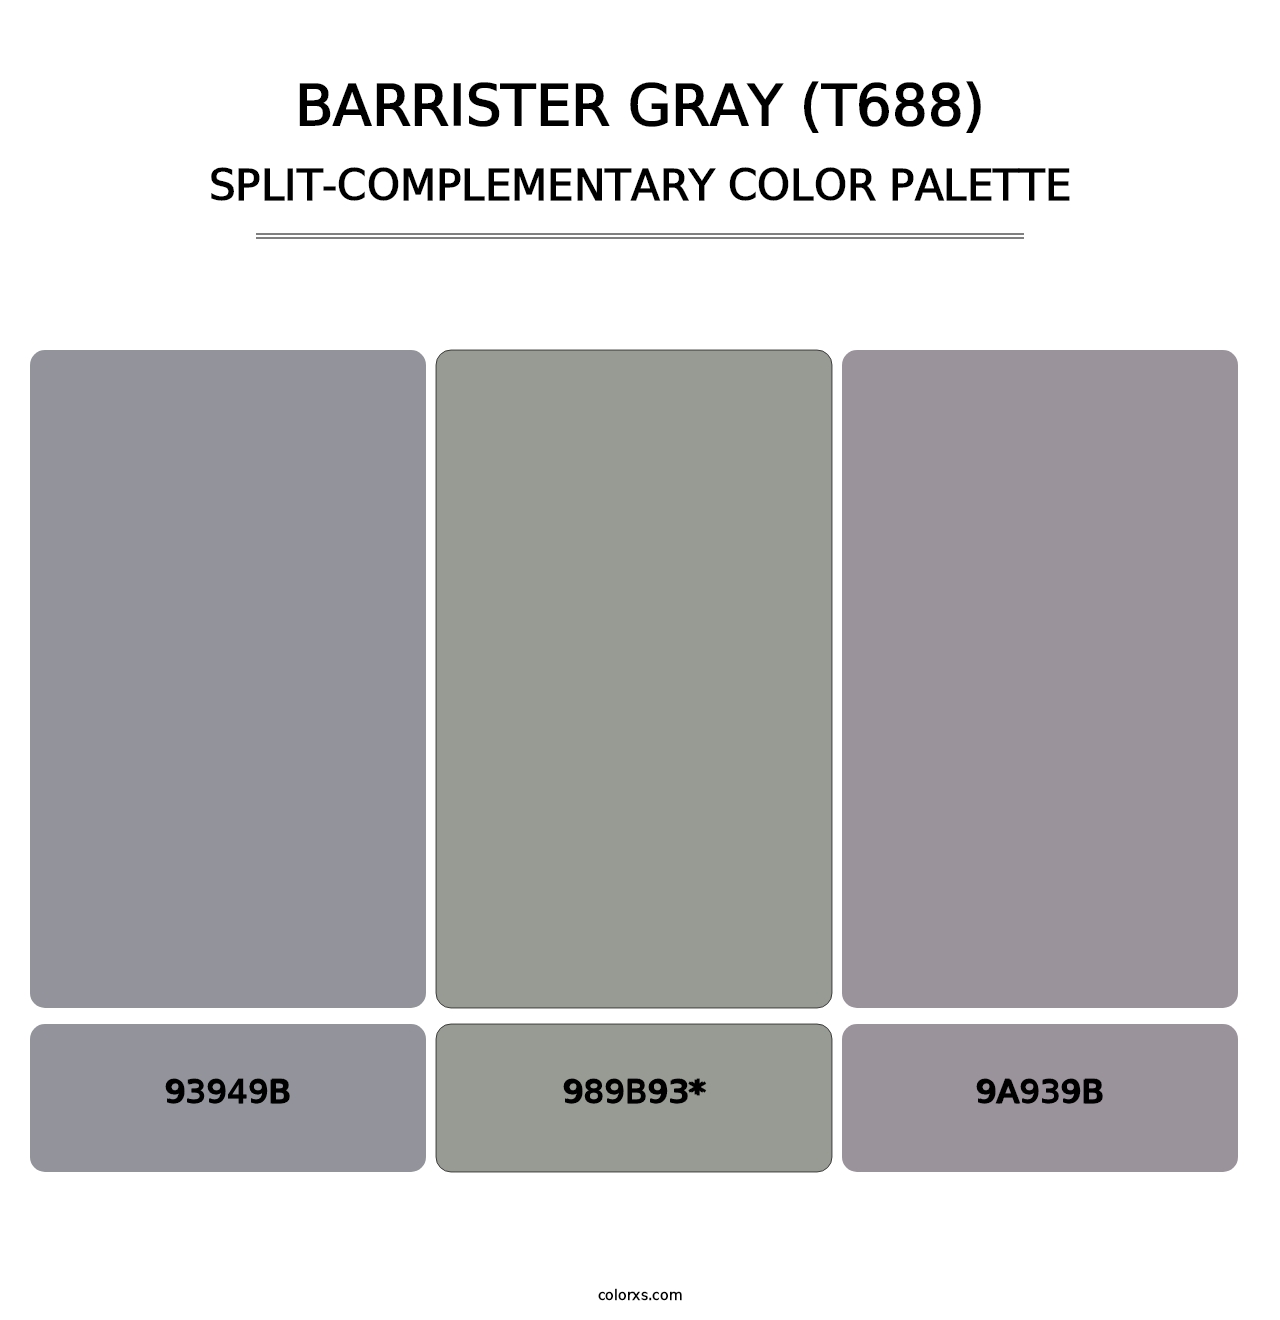 Barrister Gray (T688) - Split-Complementary Color Palette